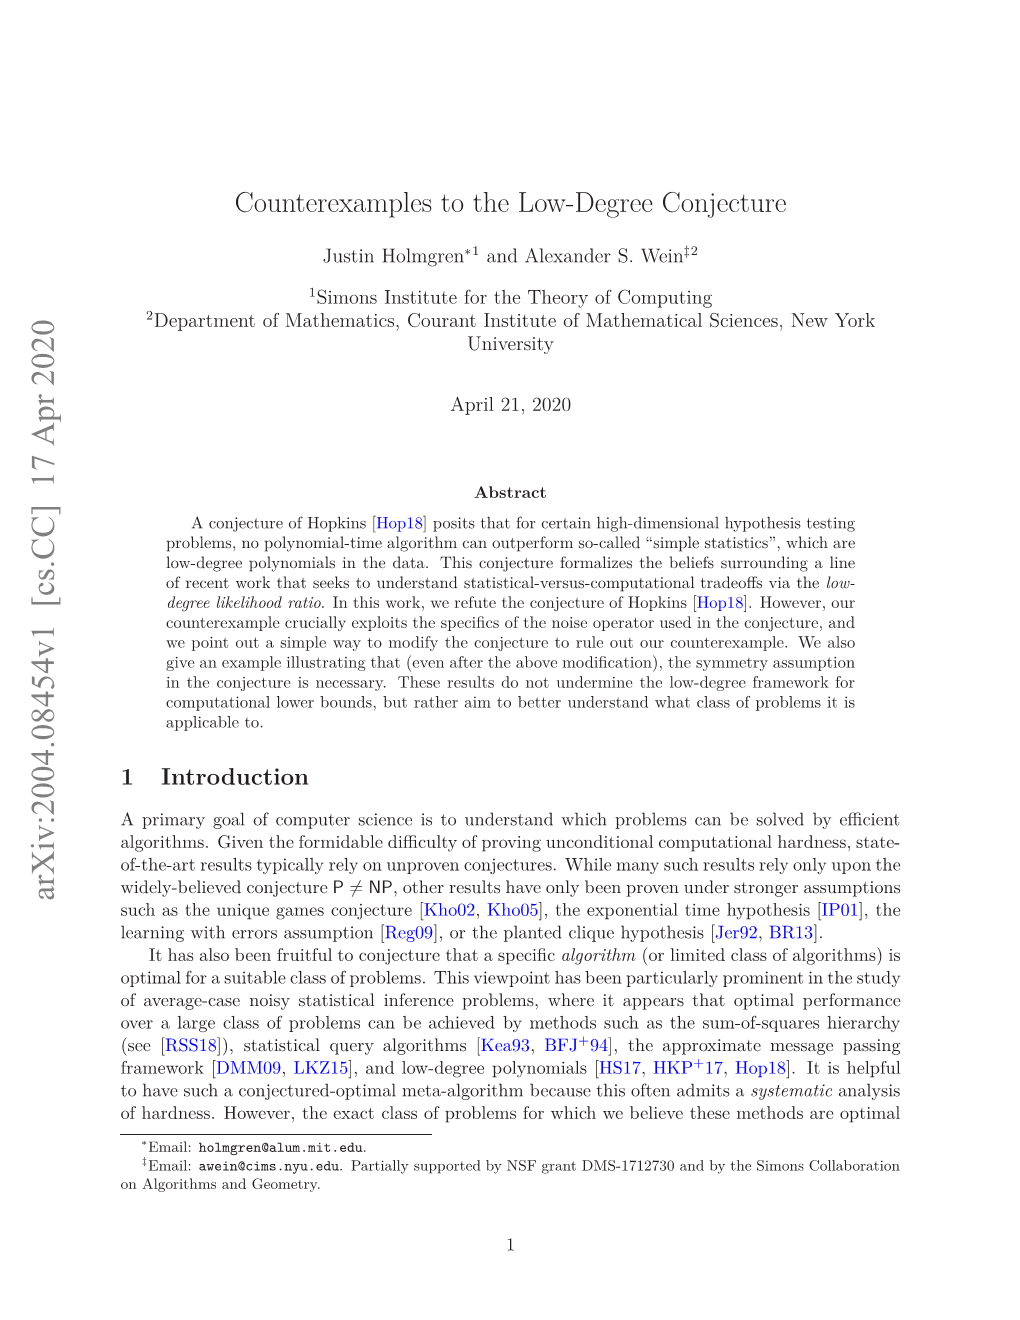 Counterexamples to the Low-Degree Conjecture